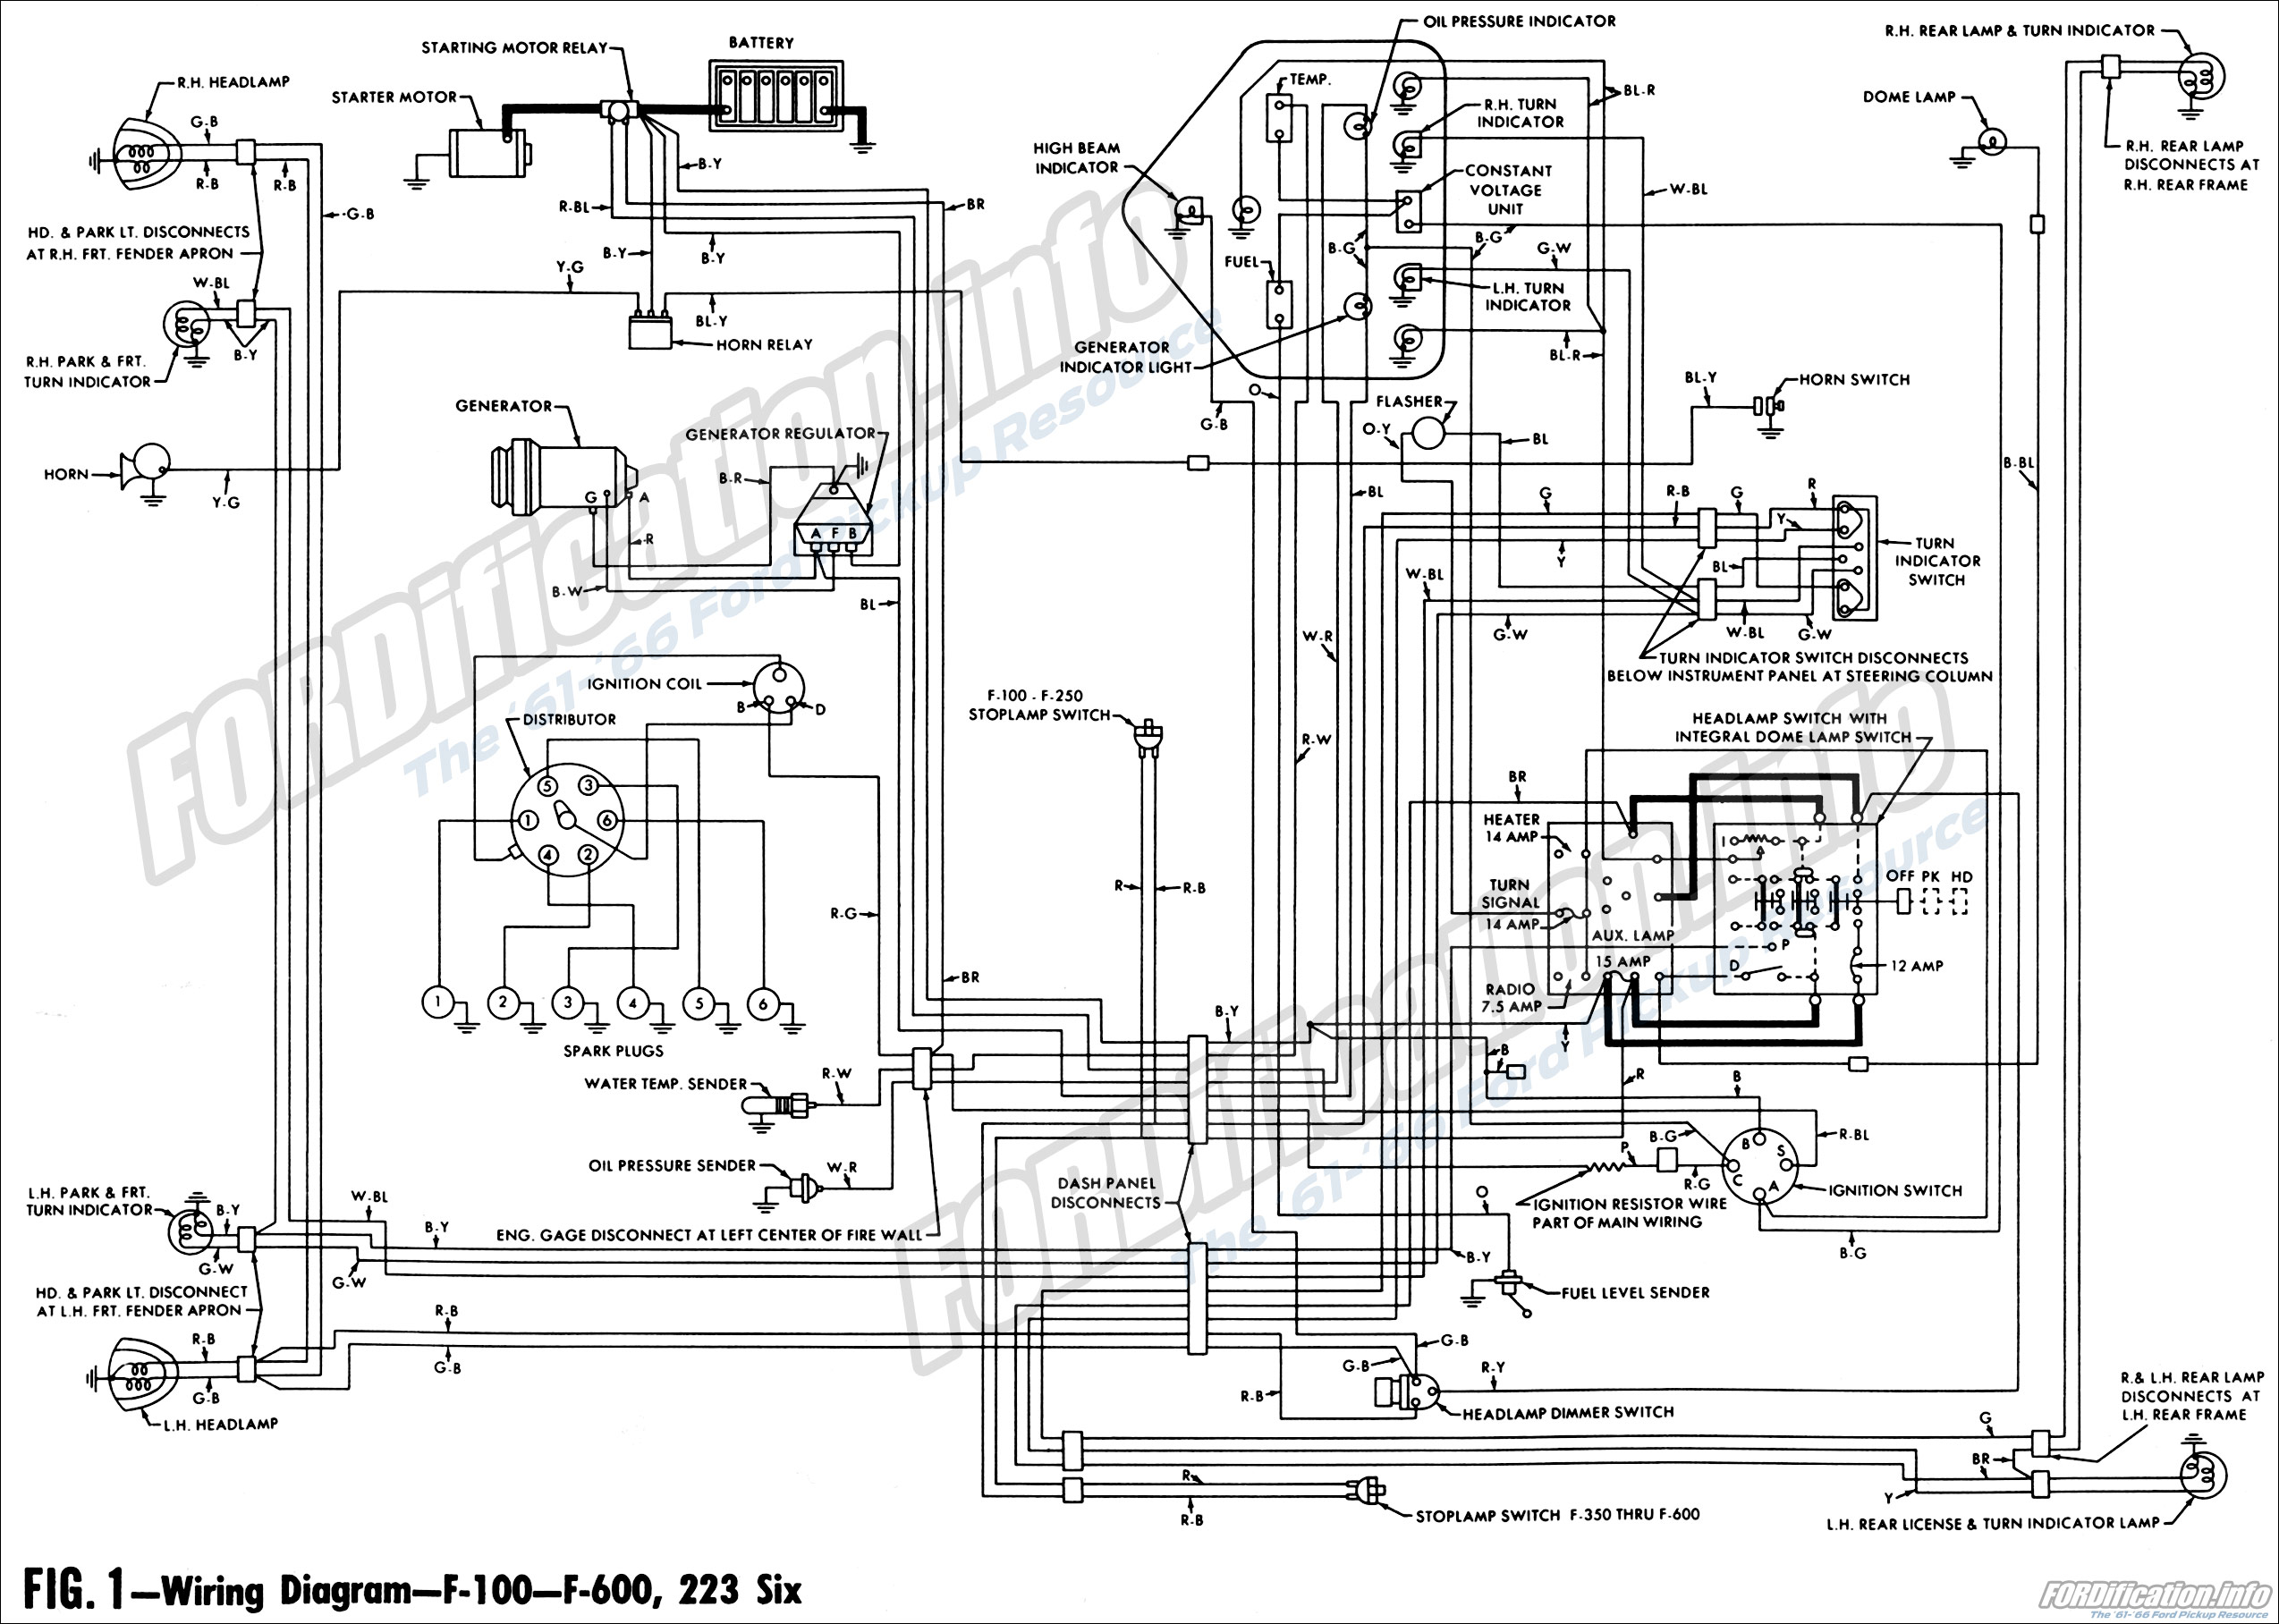 1956 Ford Headlight Switch Wiring Diagram - Collection - Wiring Diagram Sample